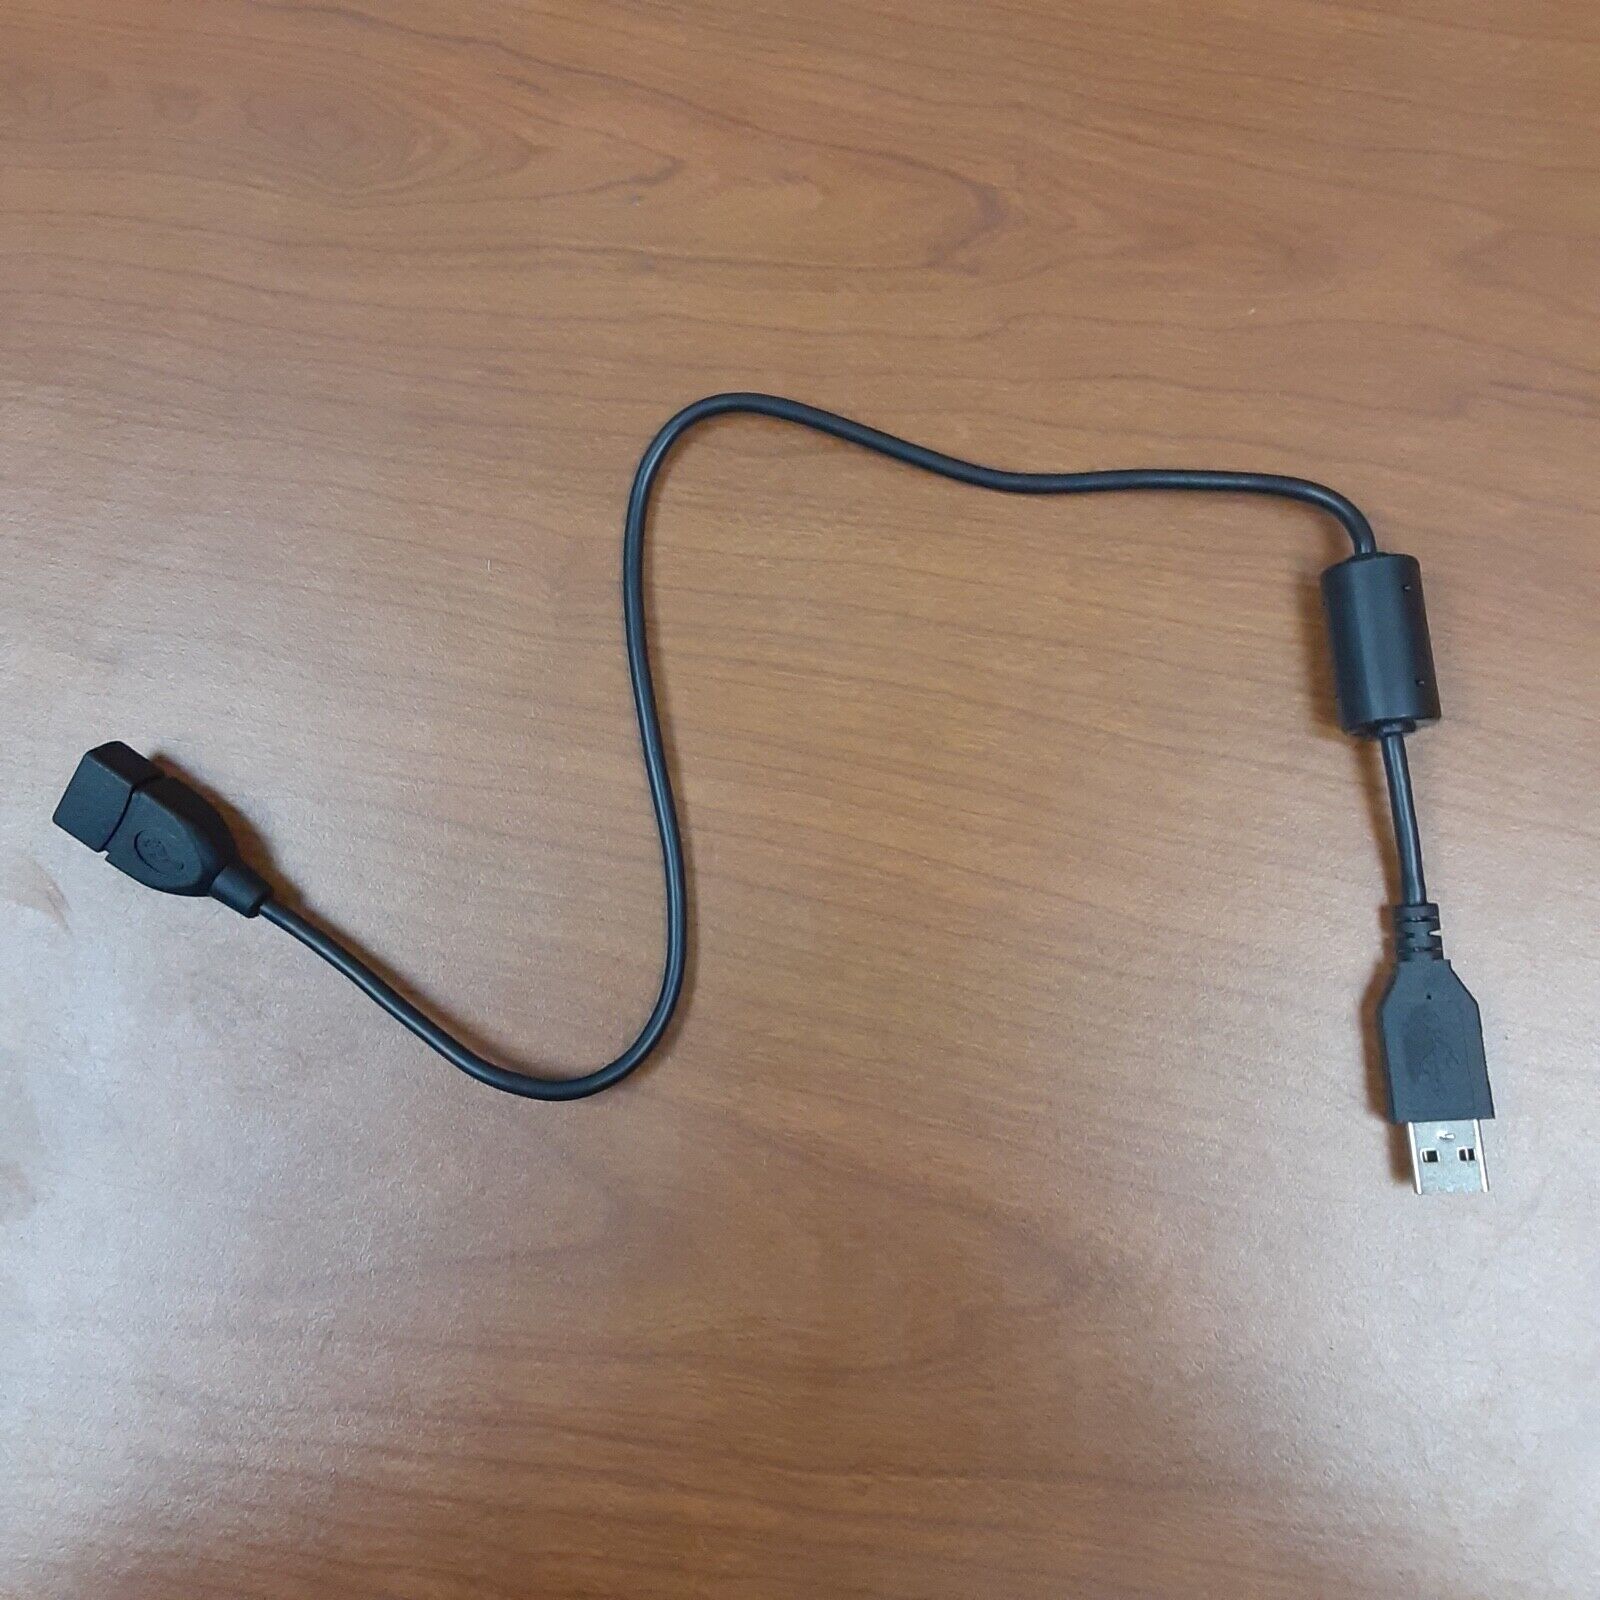 USB 2.0 Extension Cable 18